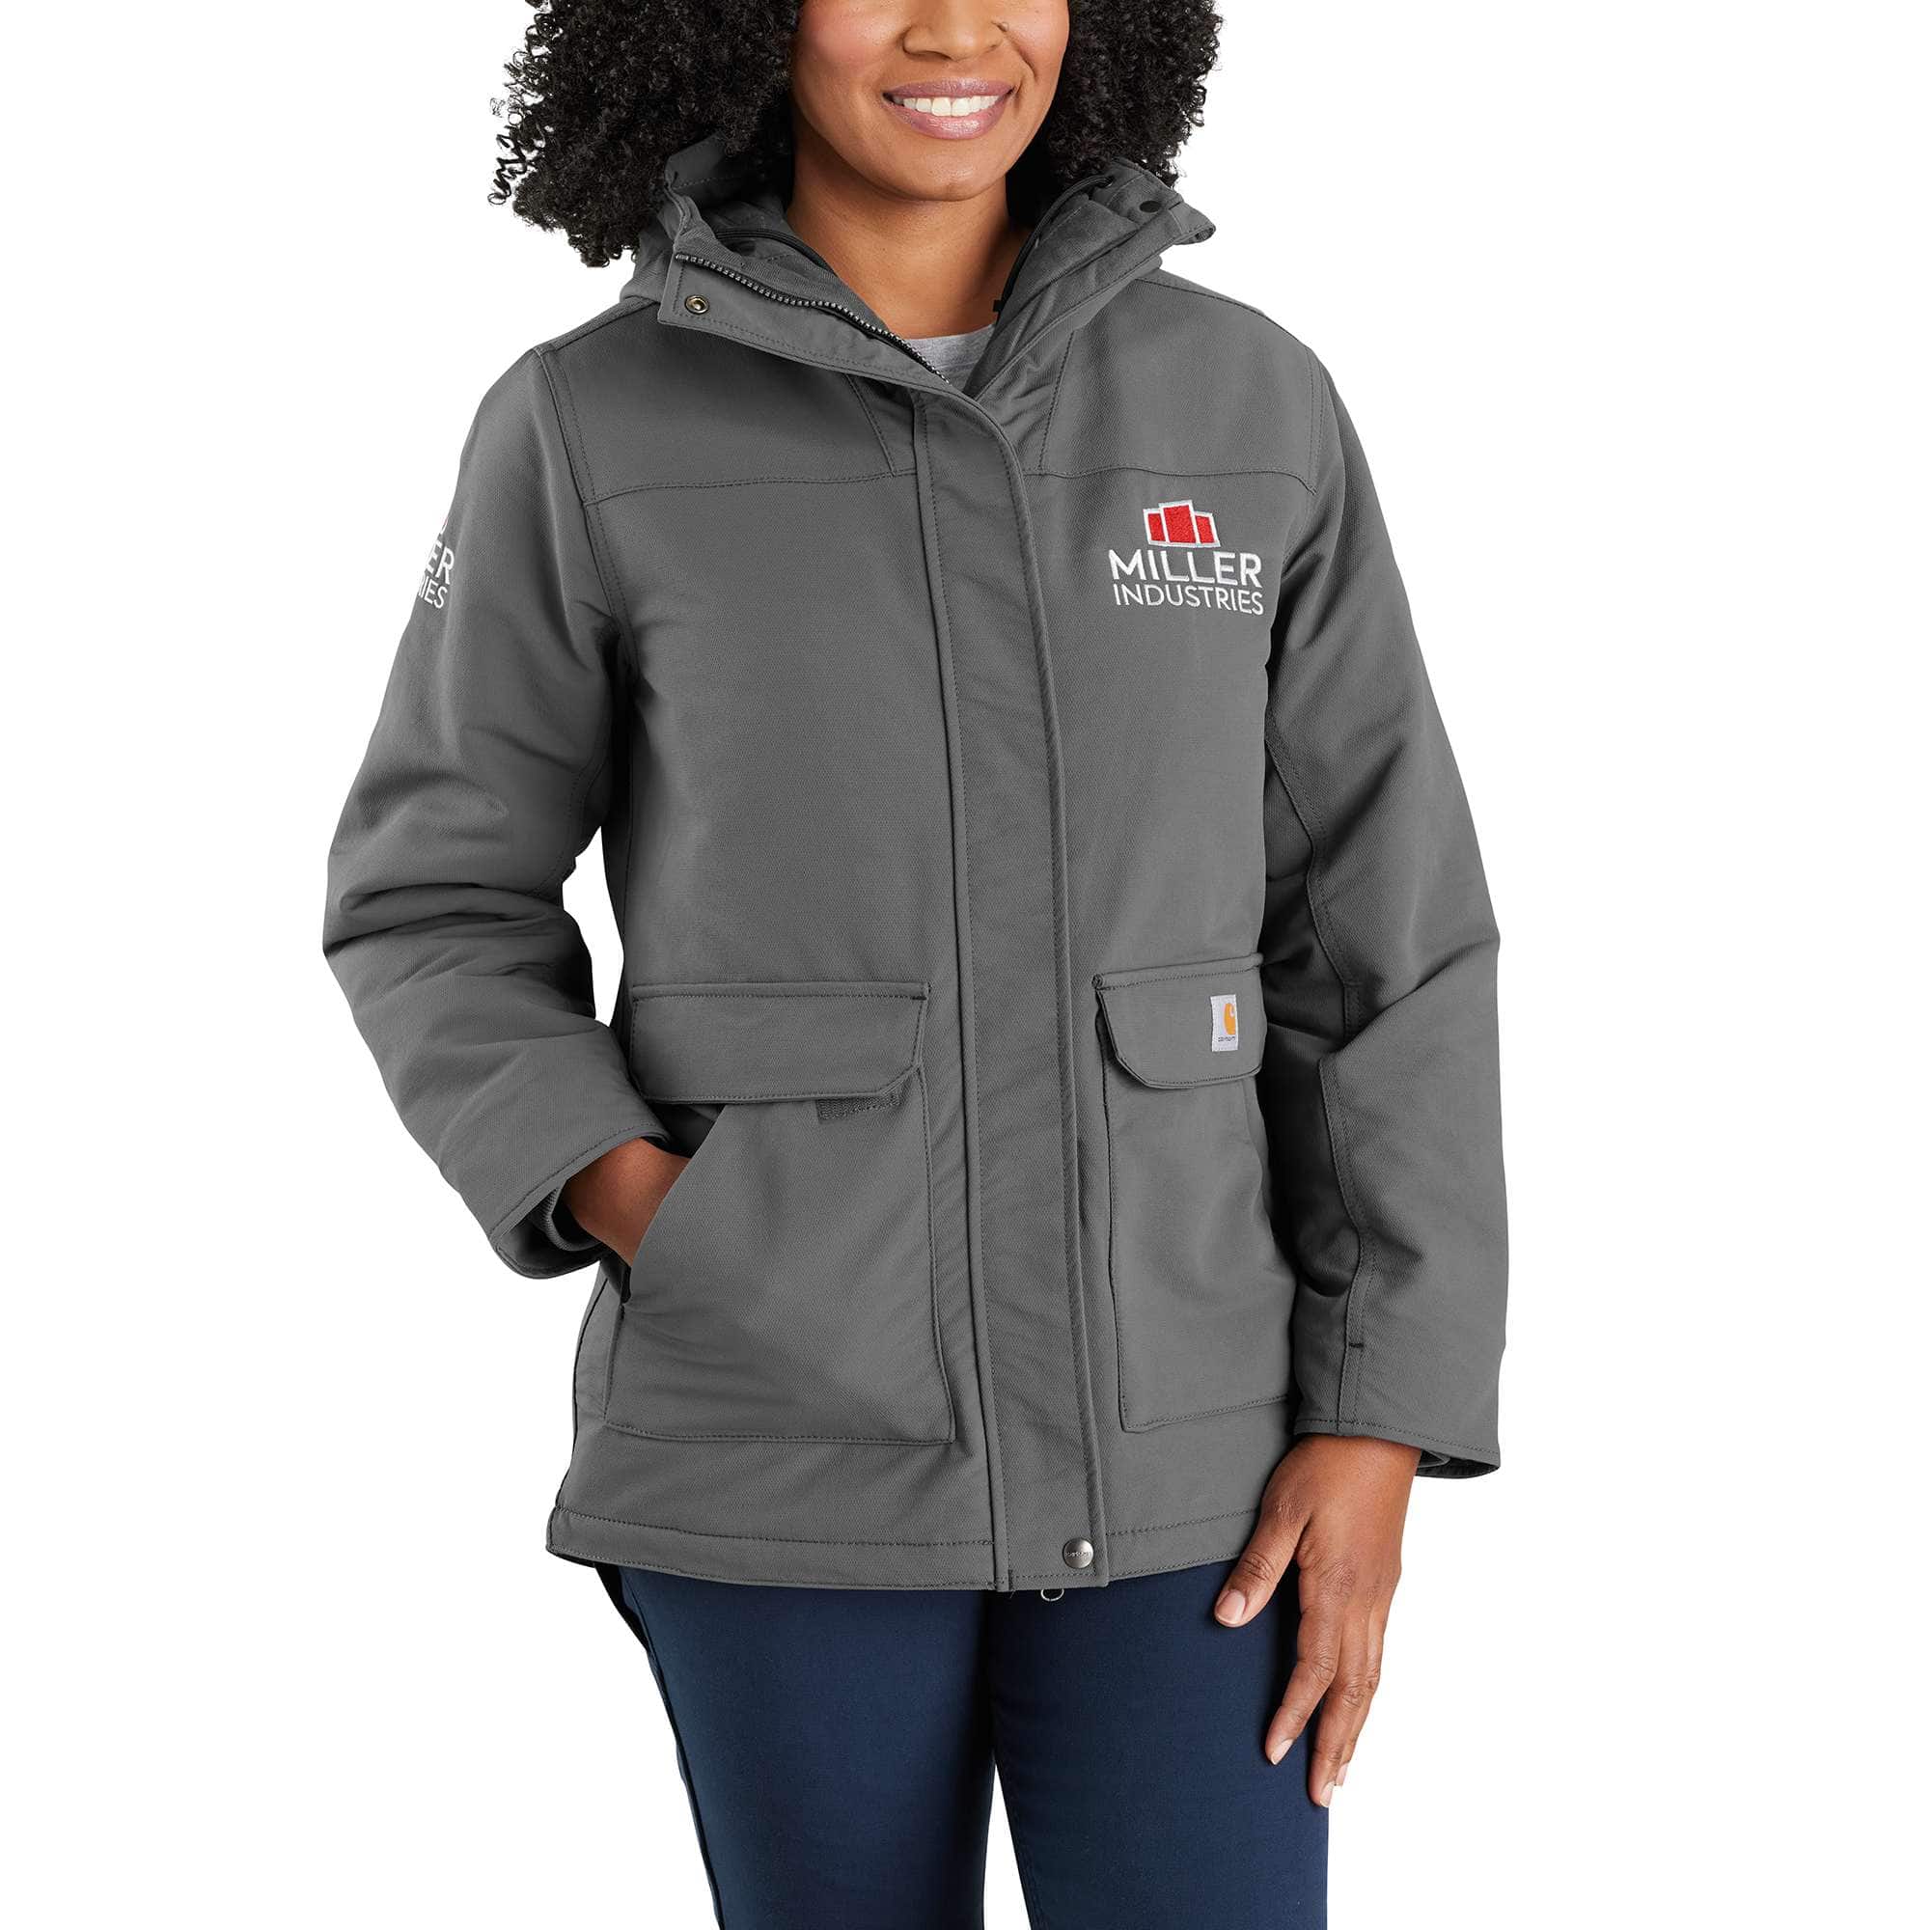 Custom Carhartt Company Clothing and Gear Branded with Your Logo